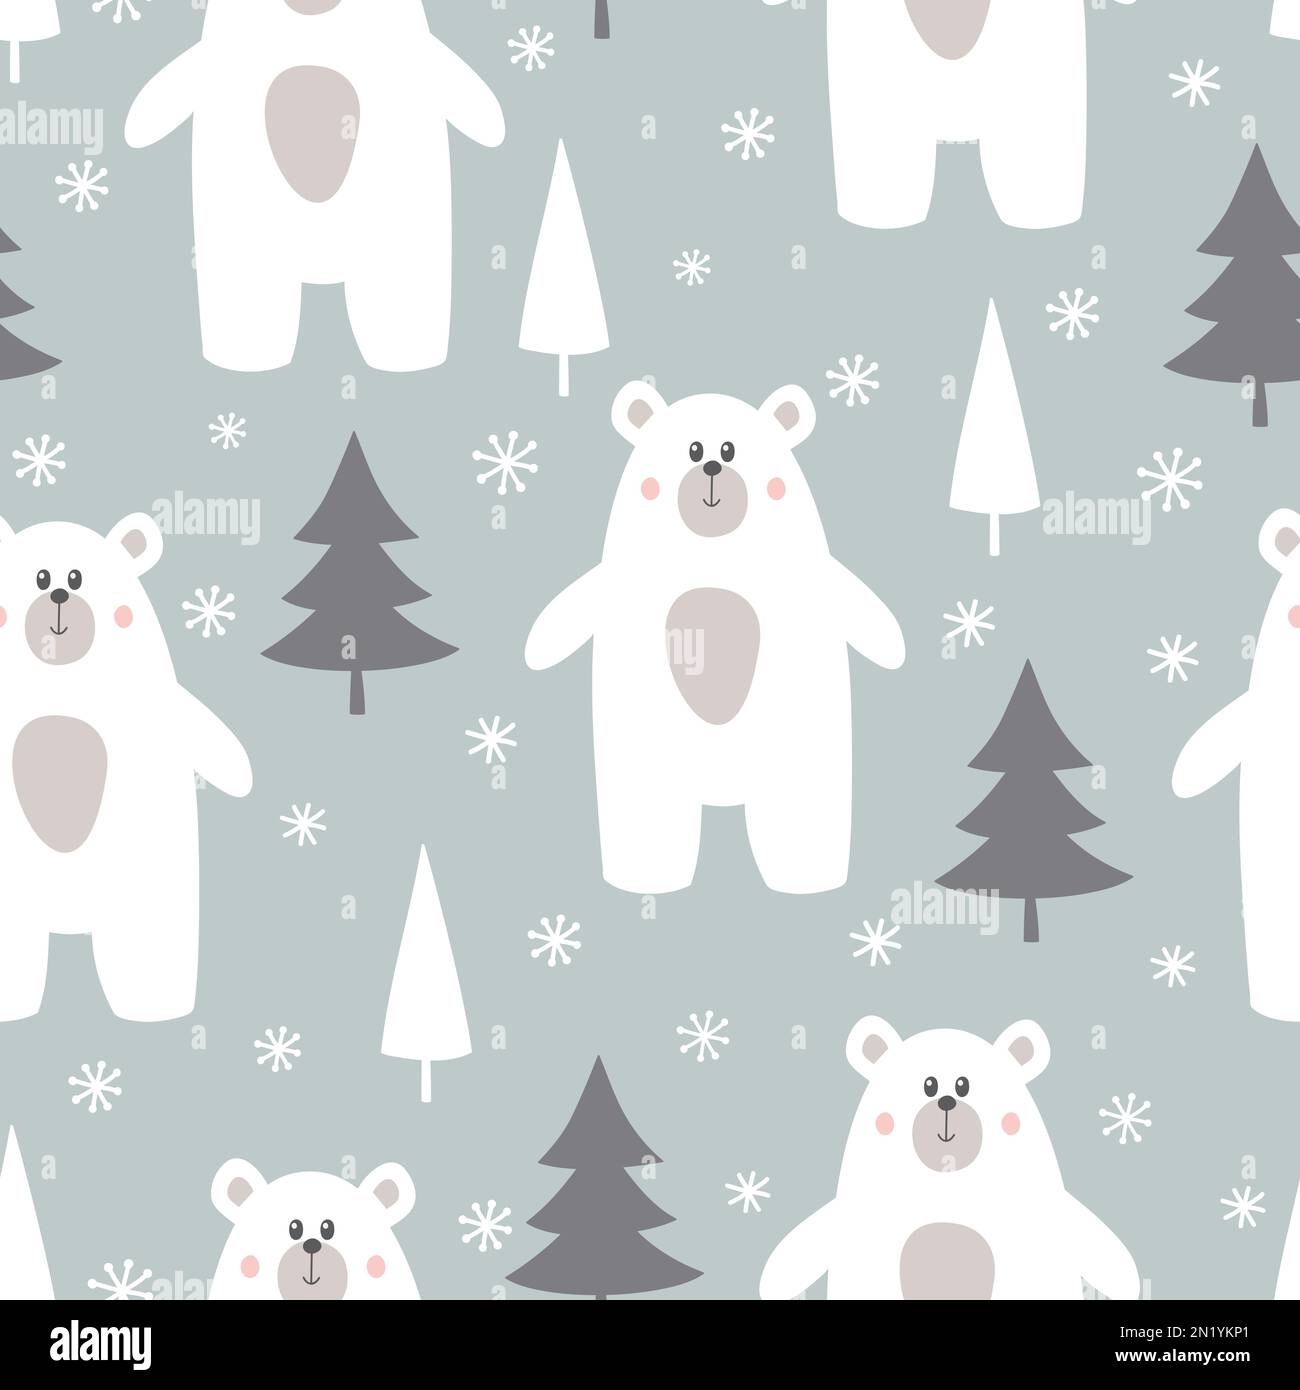 Cute polar bear seamless pattern. Winter background with bears, trees and snowflakes. Stock Photo